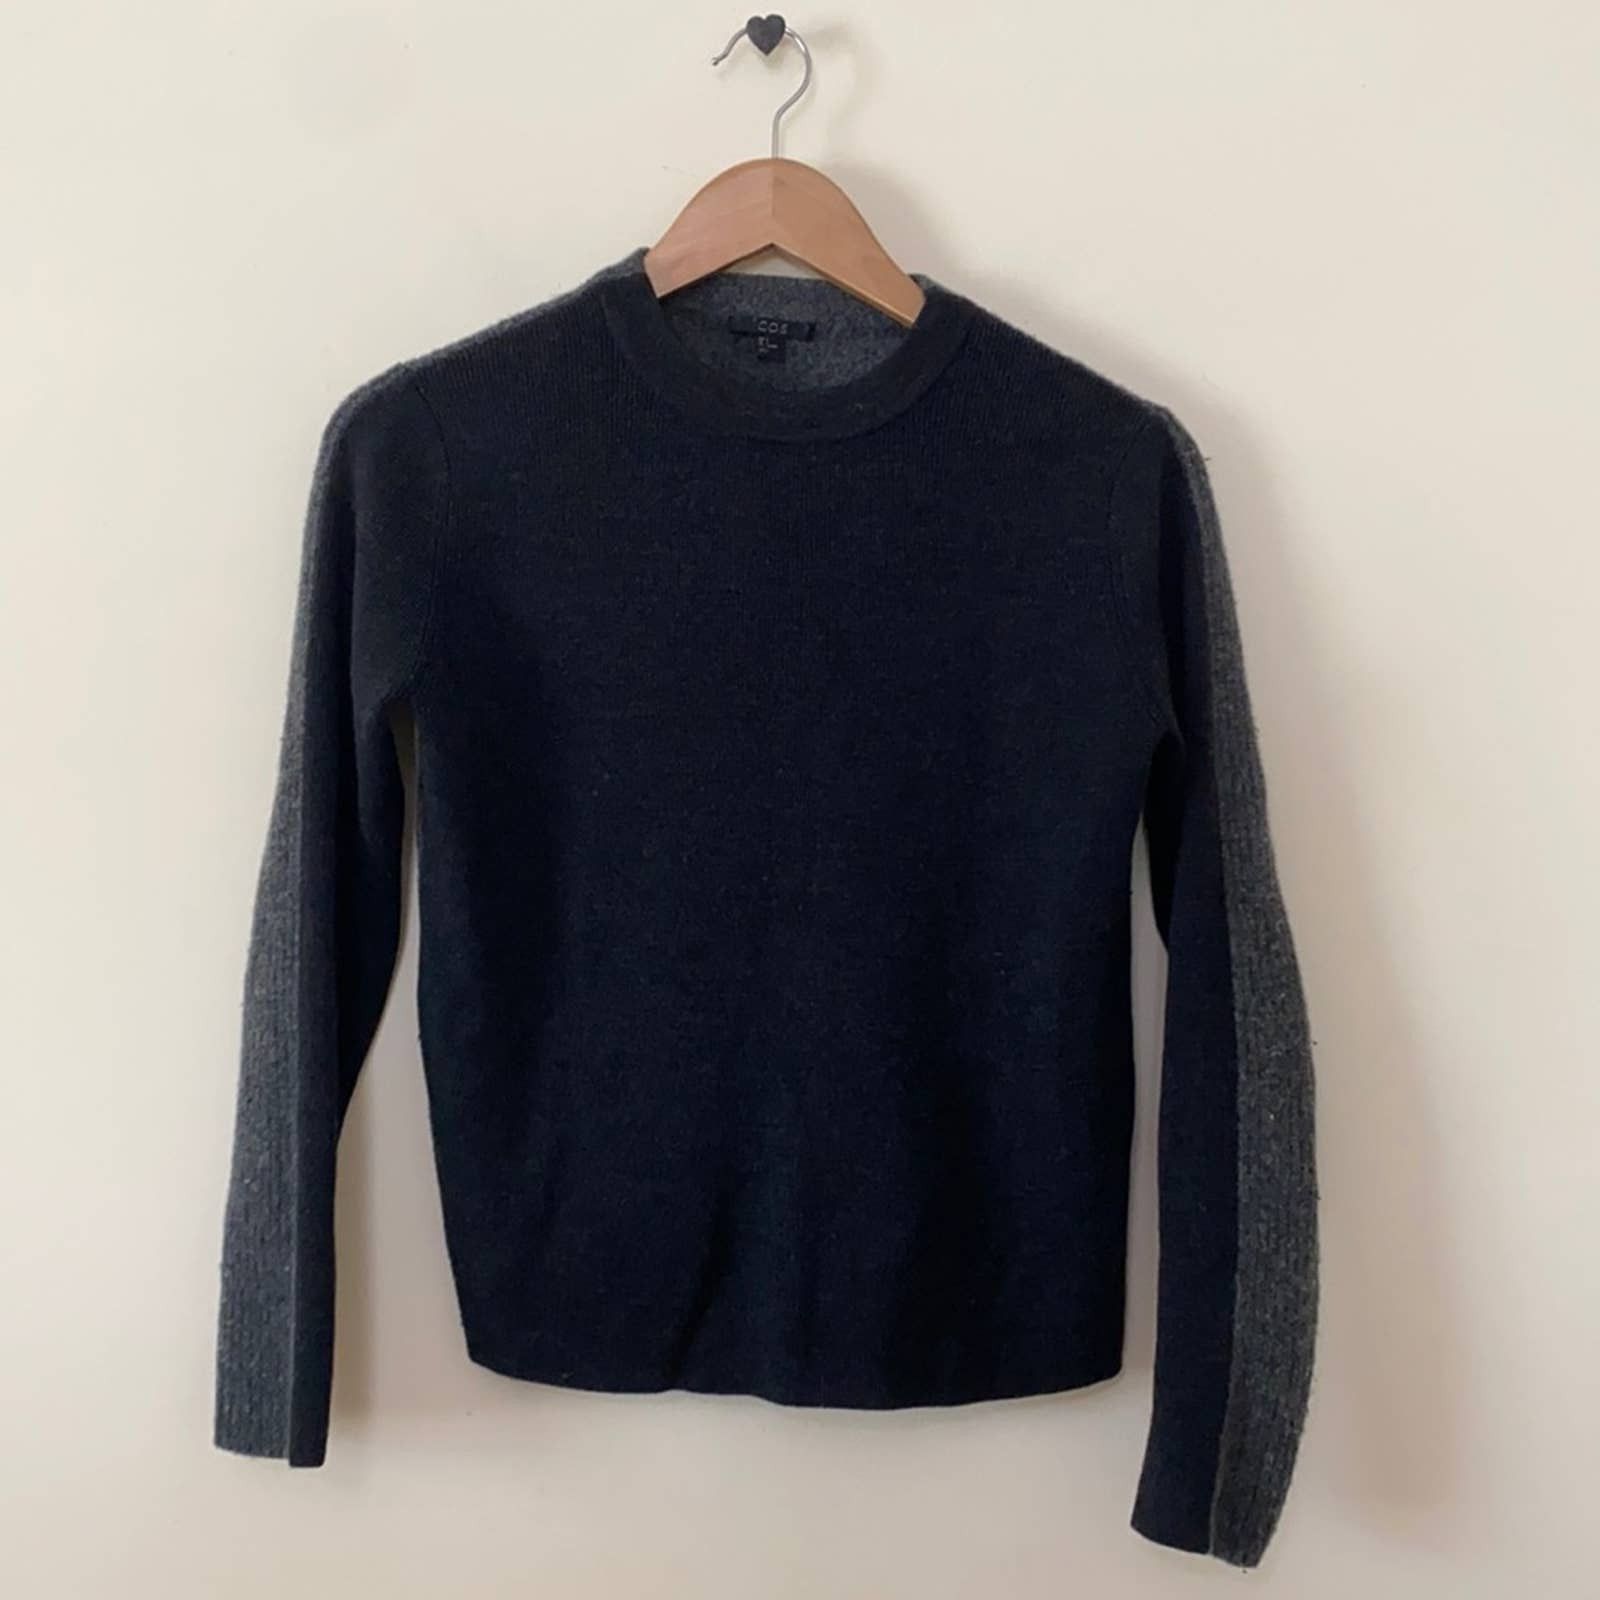 Cos COS Two Tone Wool Blend Sweater Size S / US 4 / IT 40 - 1 Preview